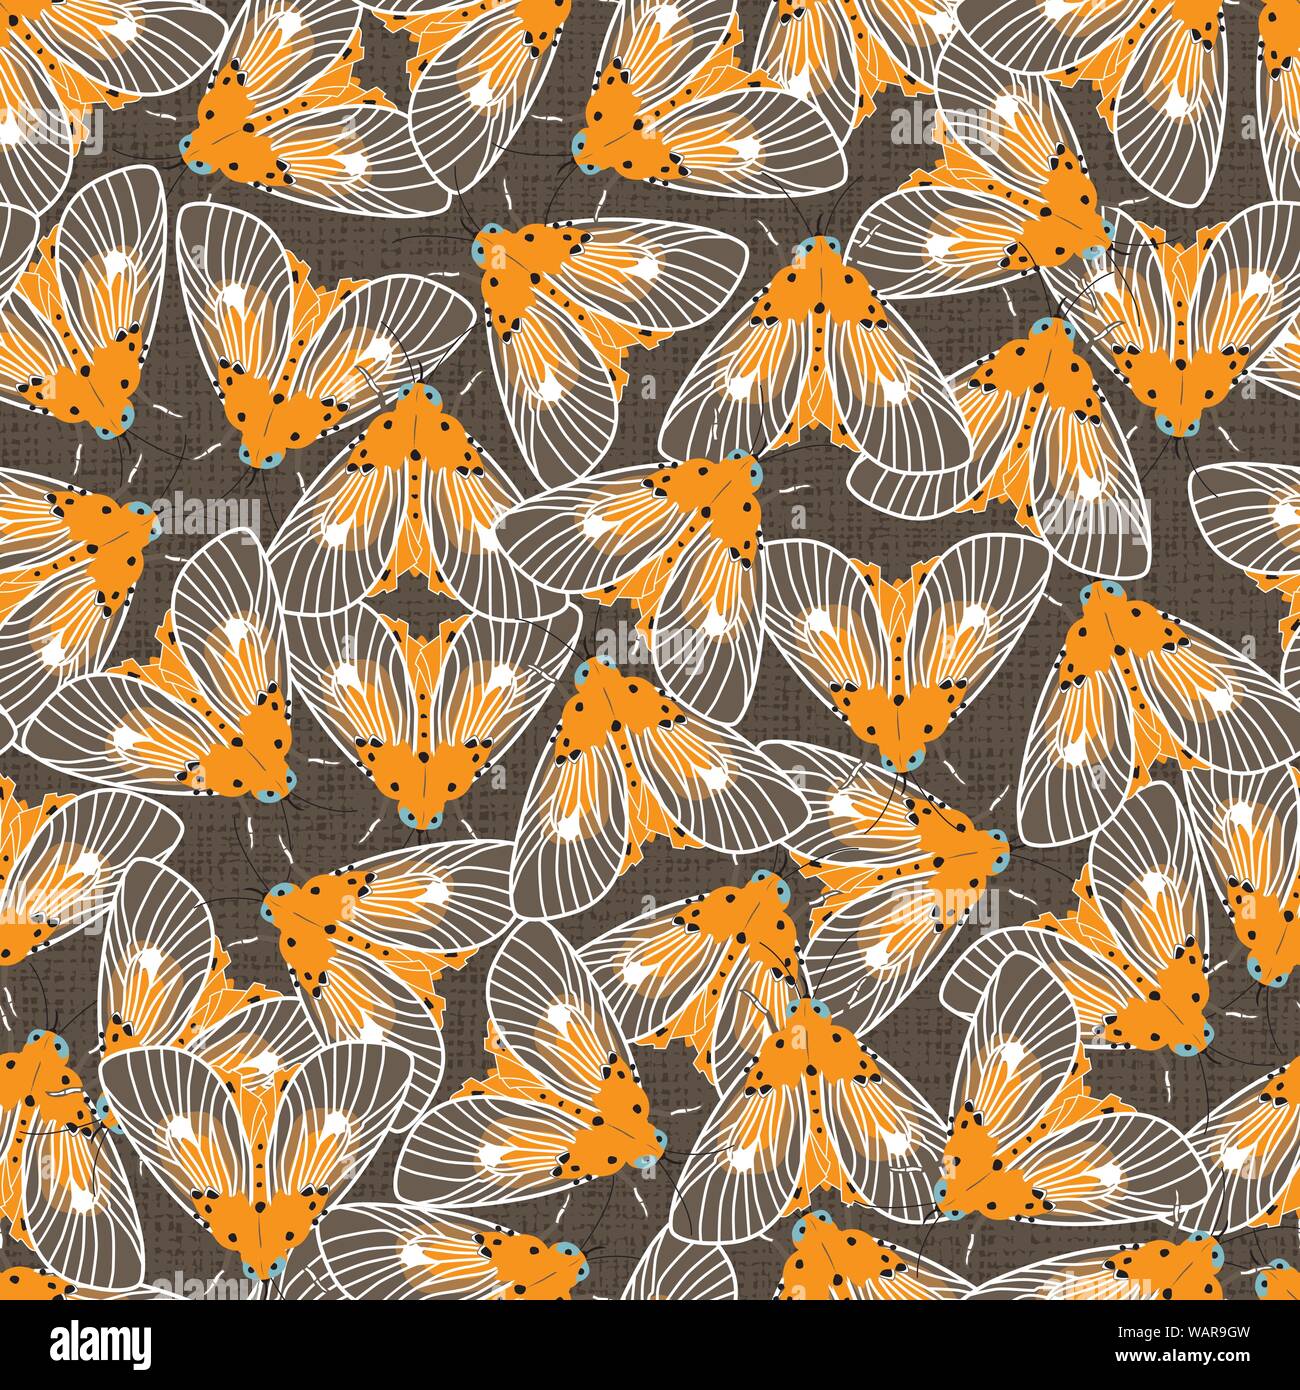 Vector yellow and brown moths with detailed wings outlines repeat pattern. Suitable for gift wrap, textile or halloween wallpaper. Stock Vector